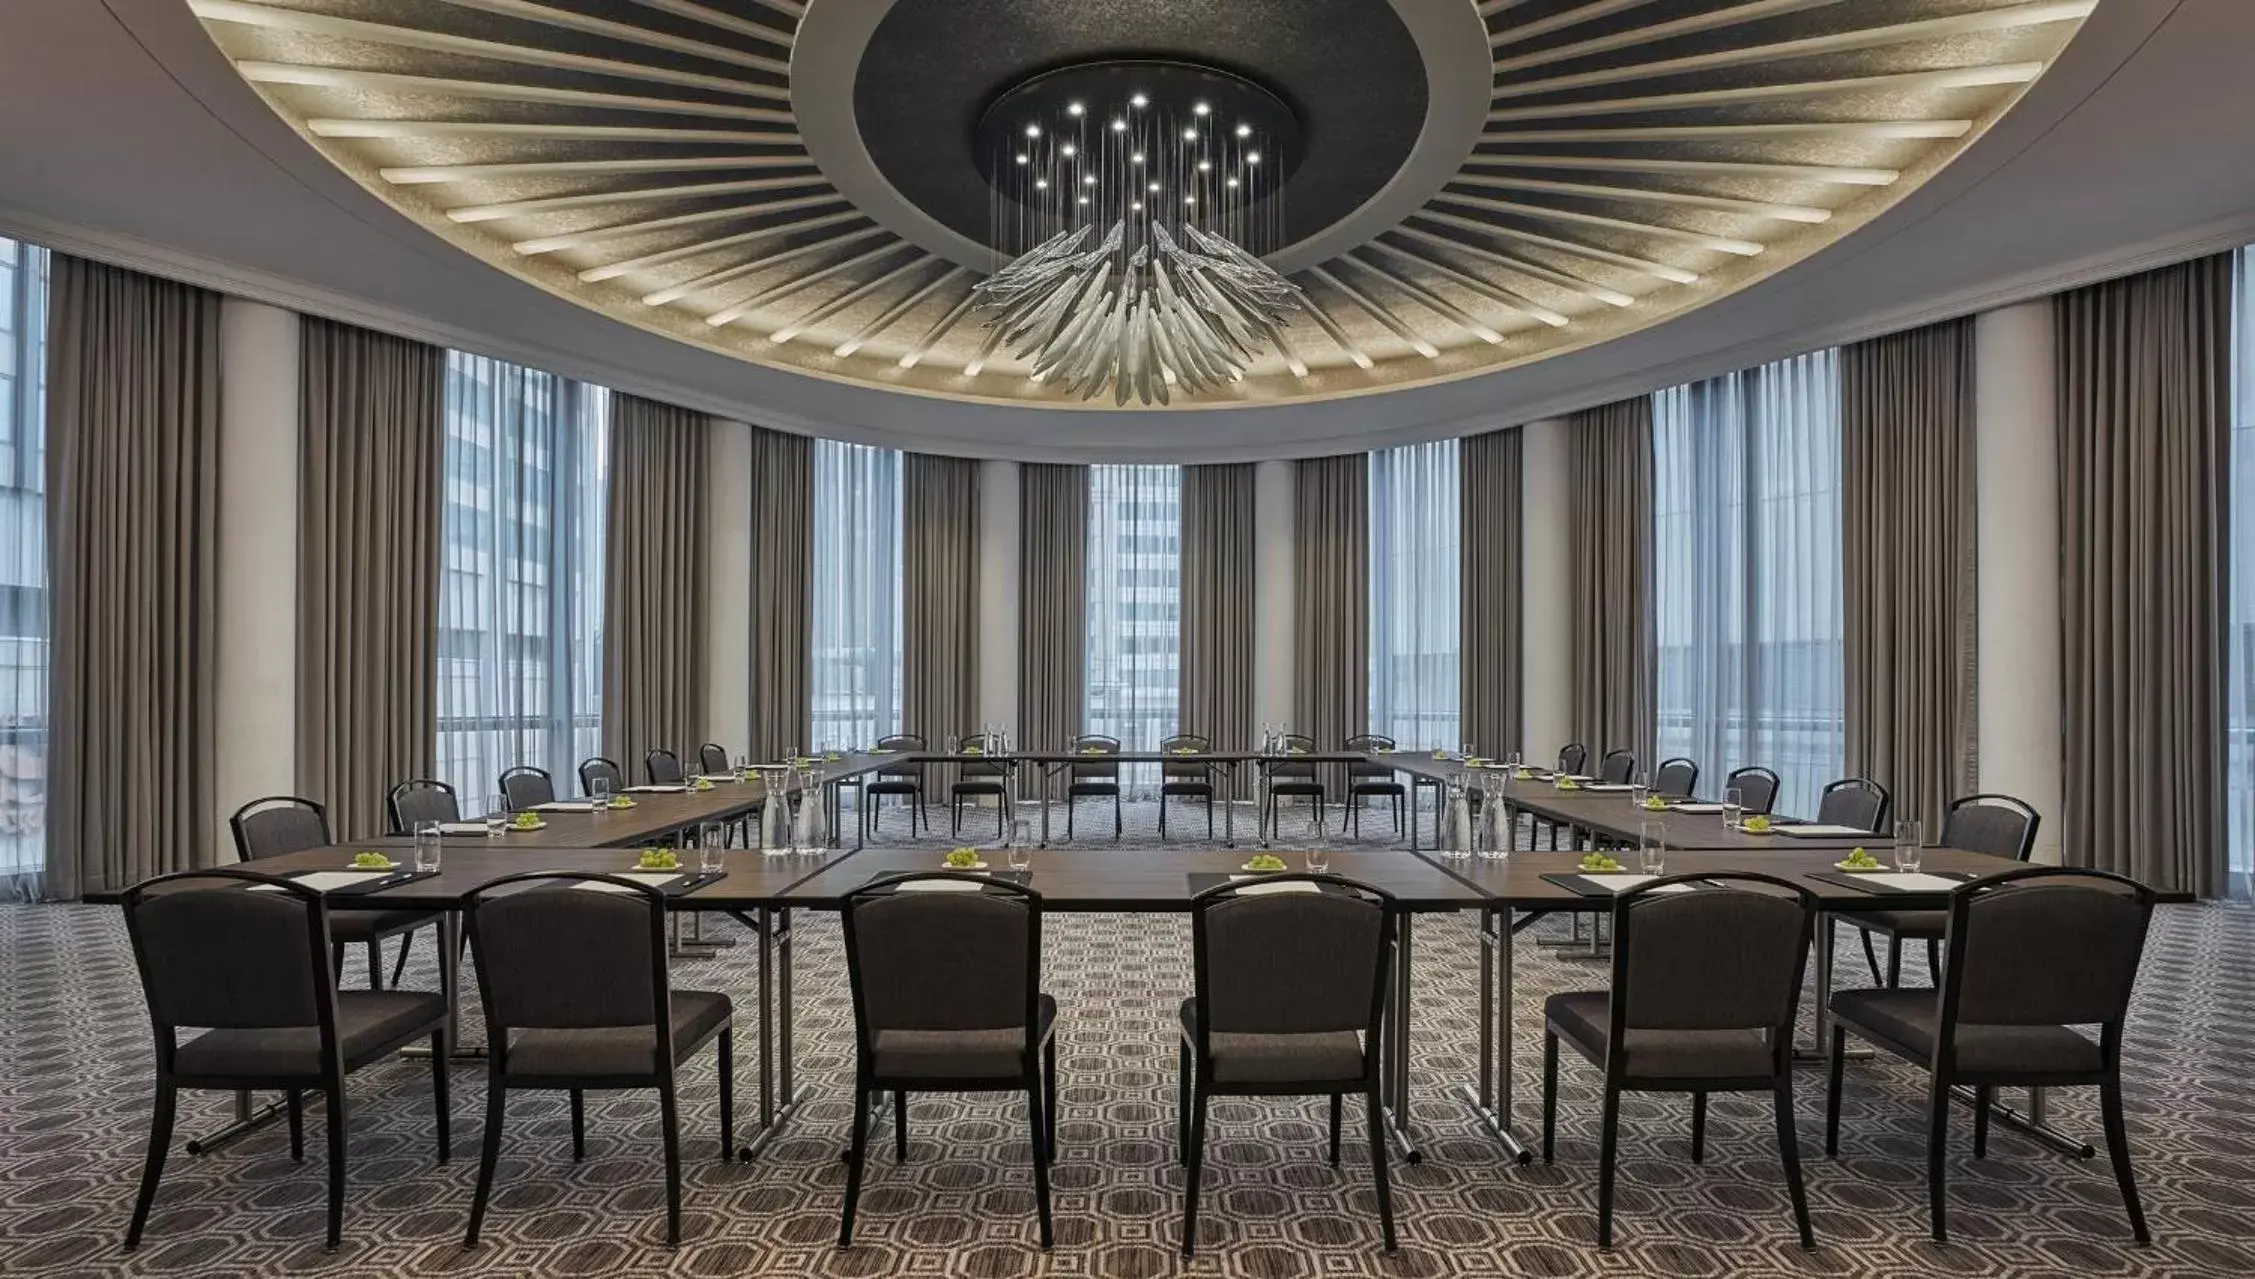 Meeting/conference room in Four Seasons Hotel One Dalton Street, Boston